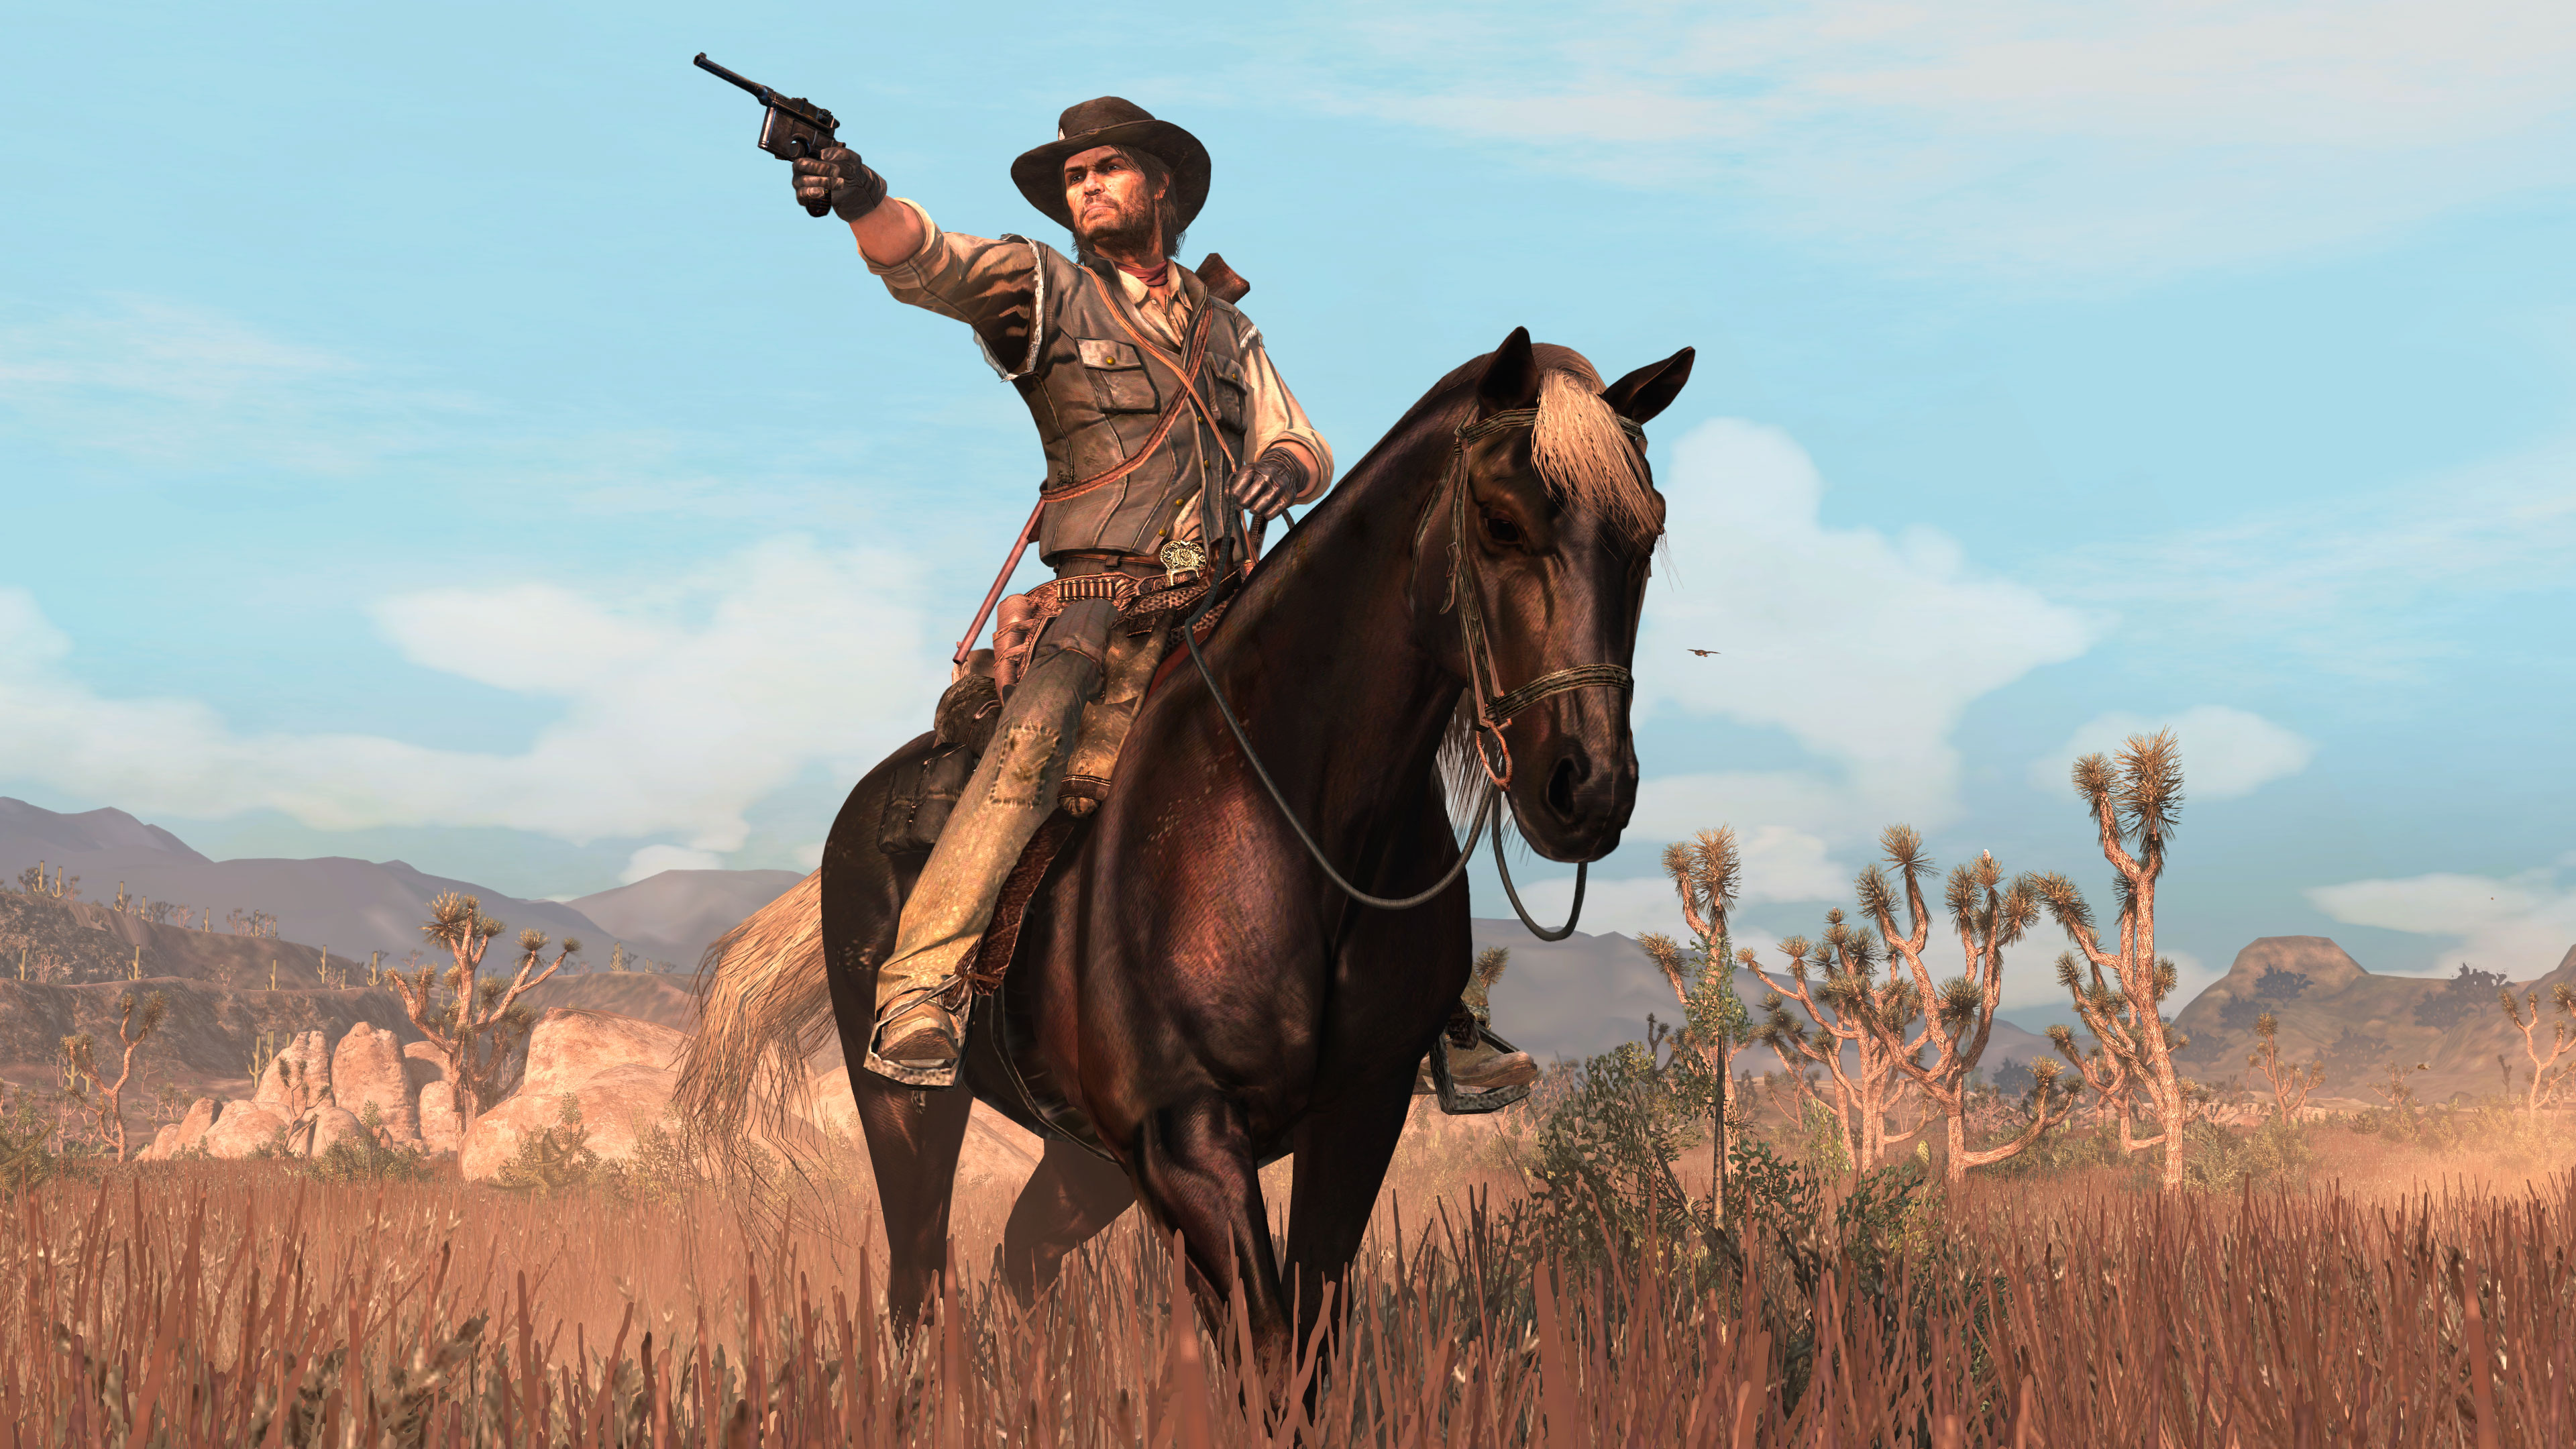 Red Dead Redemption 2: PS5 Owners Can Use This Mode To Play the Game at  60fps